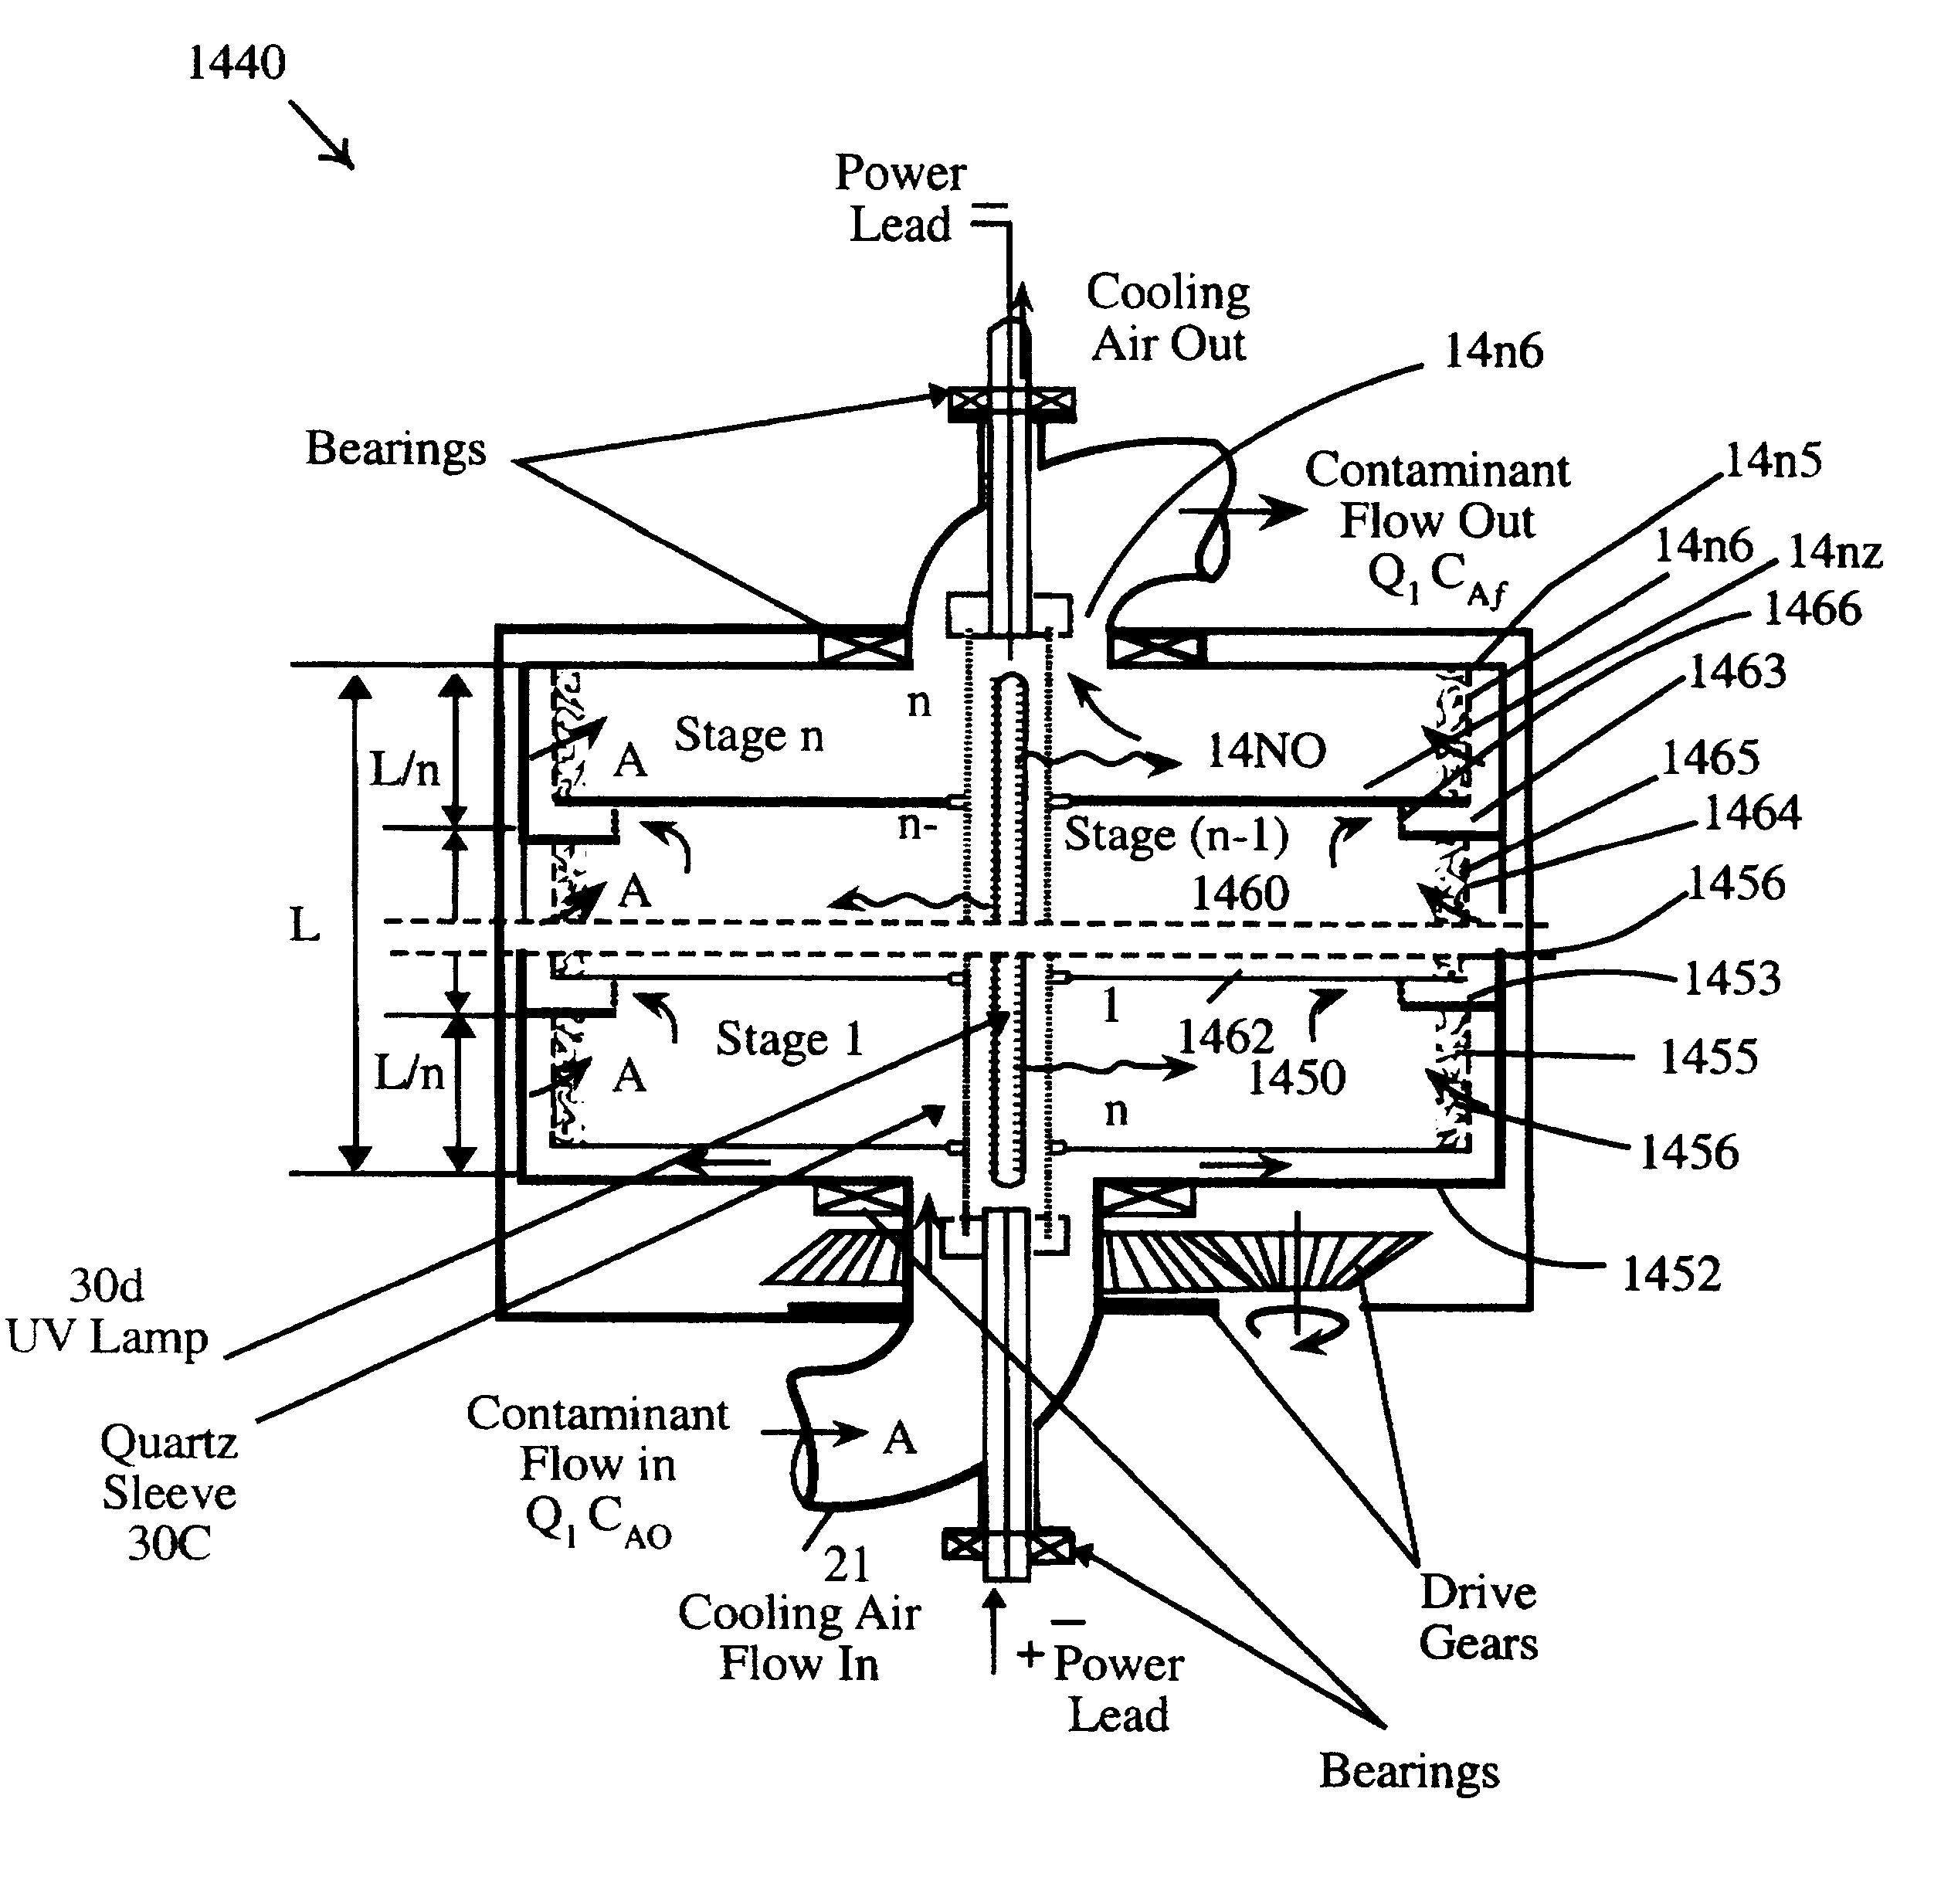 Apparatus for low flux photocatalytic pollution control